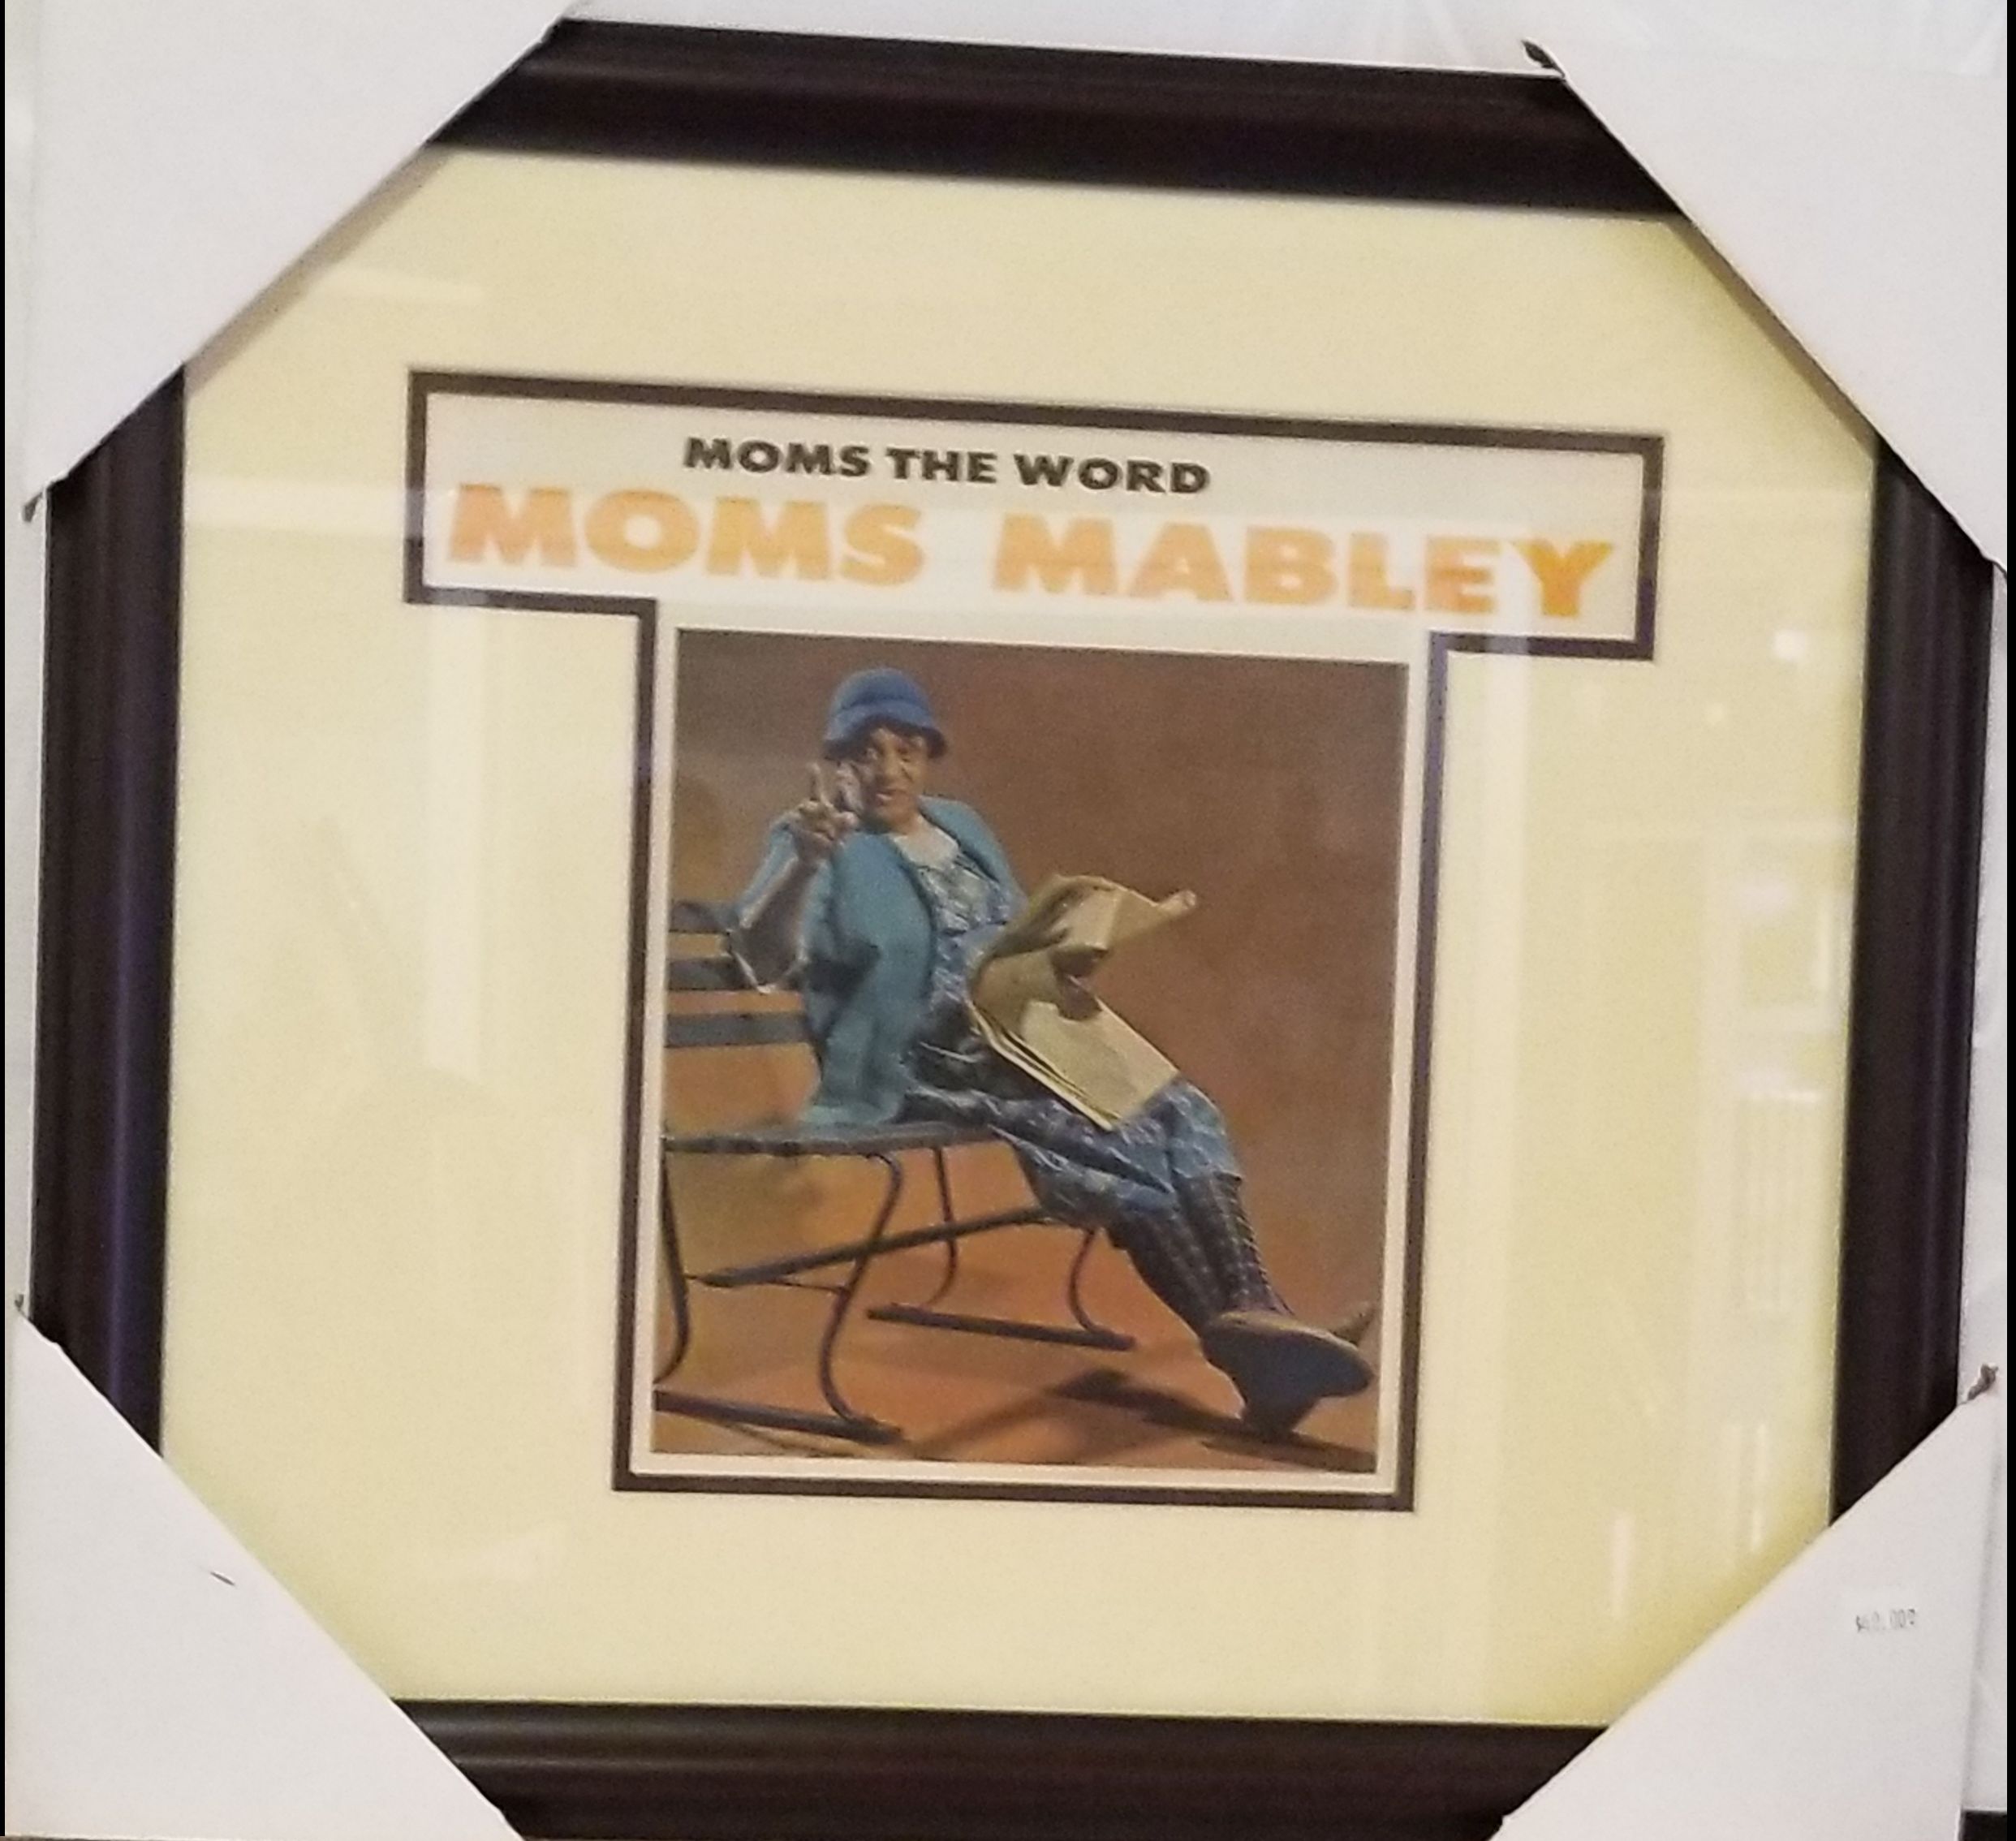 Moms The Word: Moms Mabley